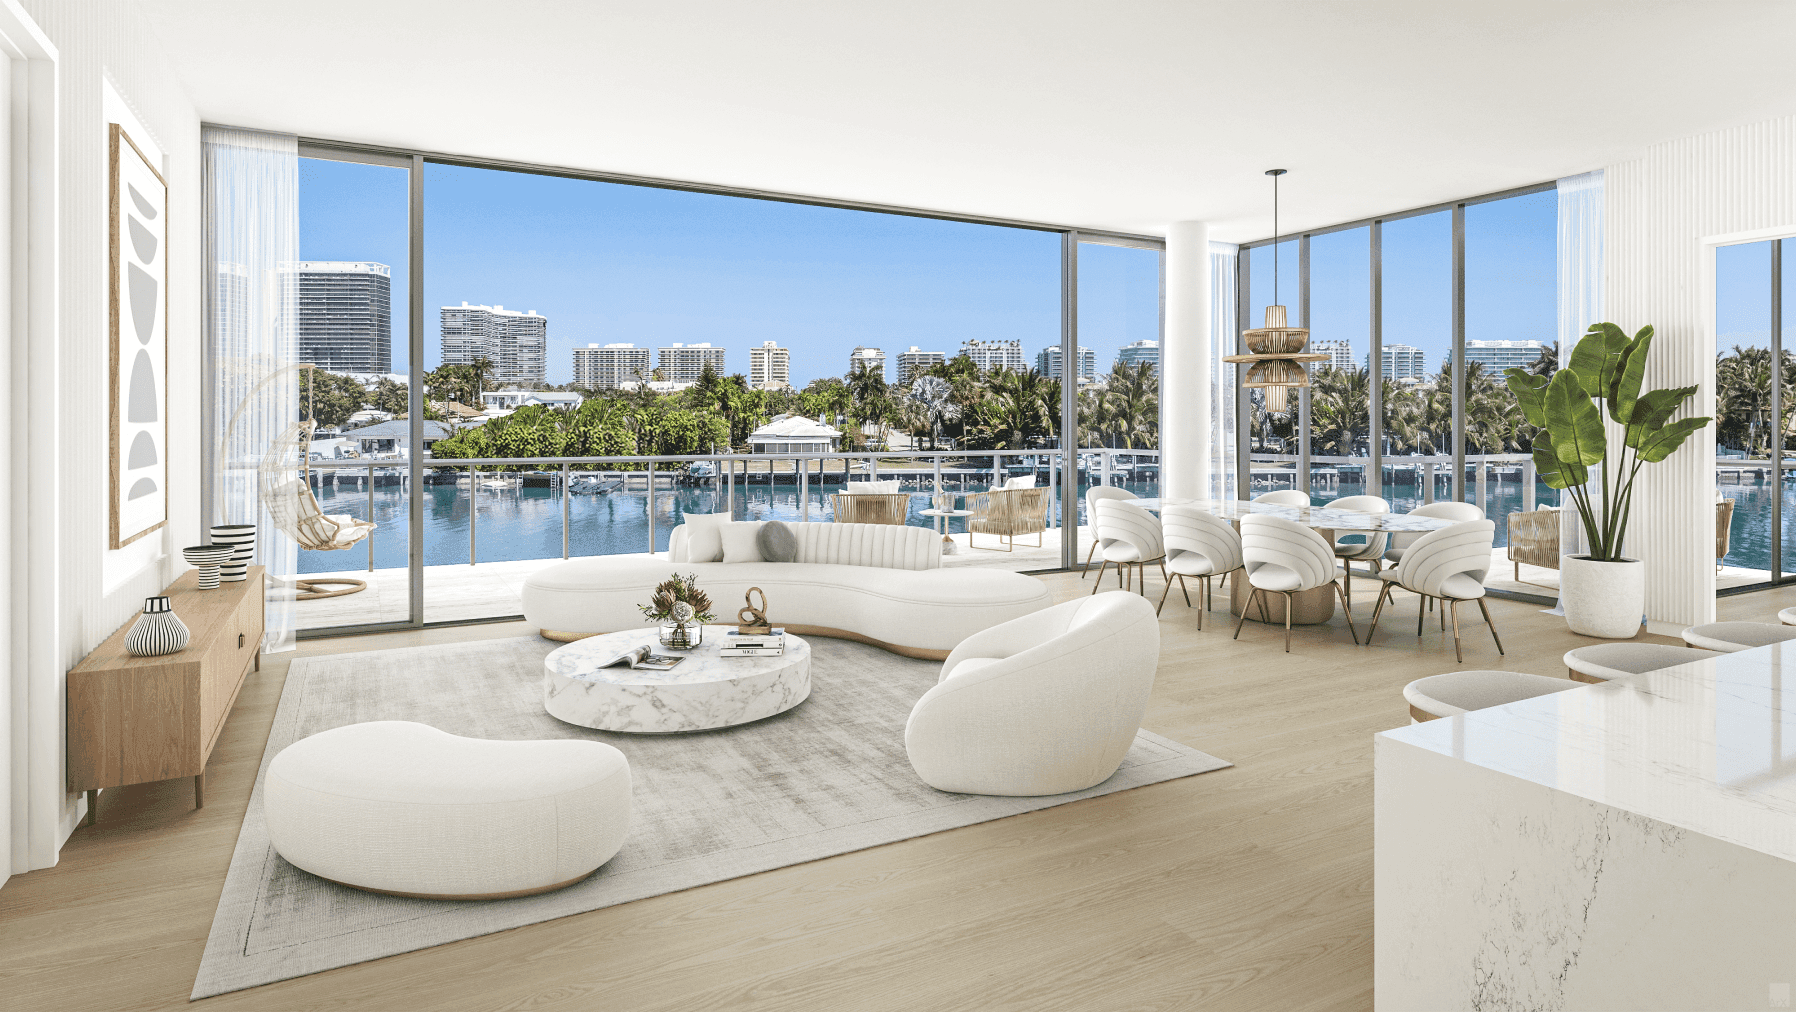 Miami| Water Front| BAL HARBOR| 4 bed 4.5 bath | 2,405 sf